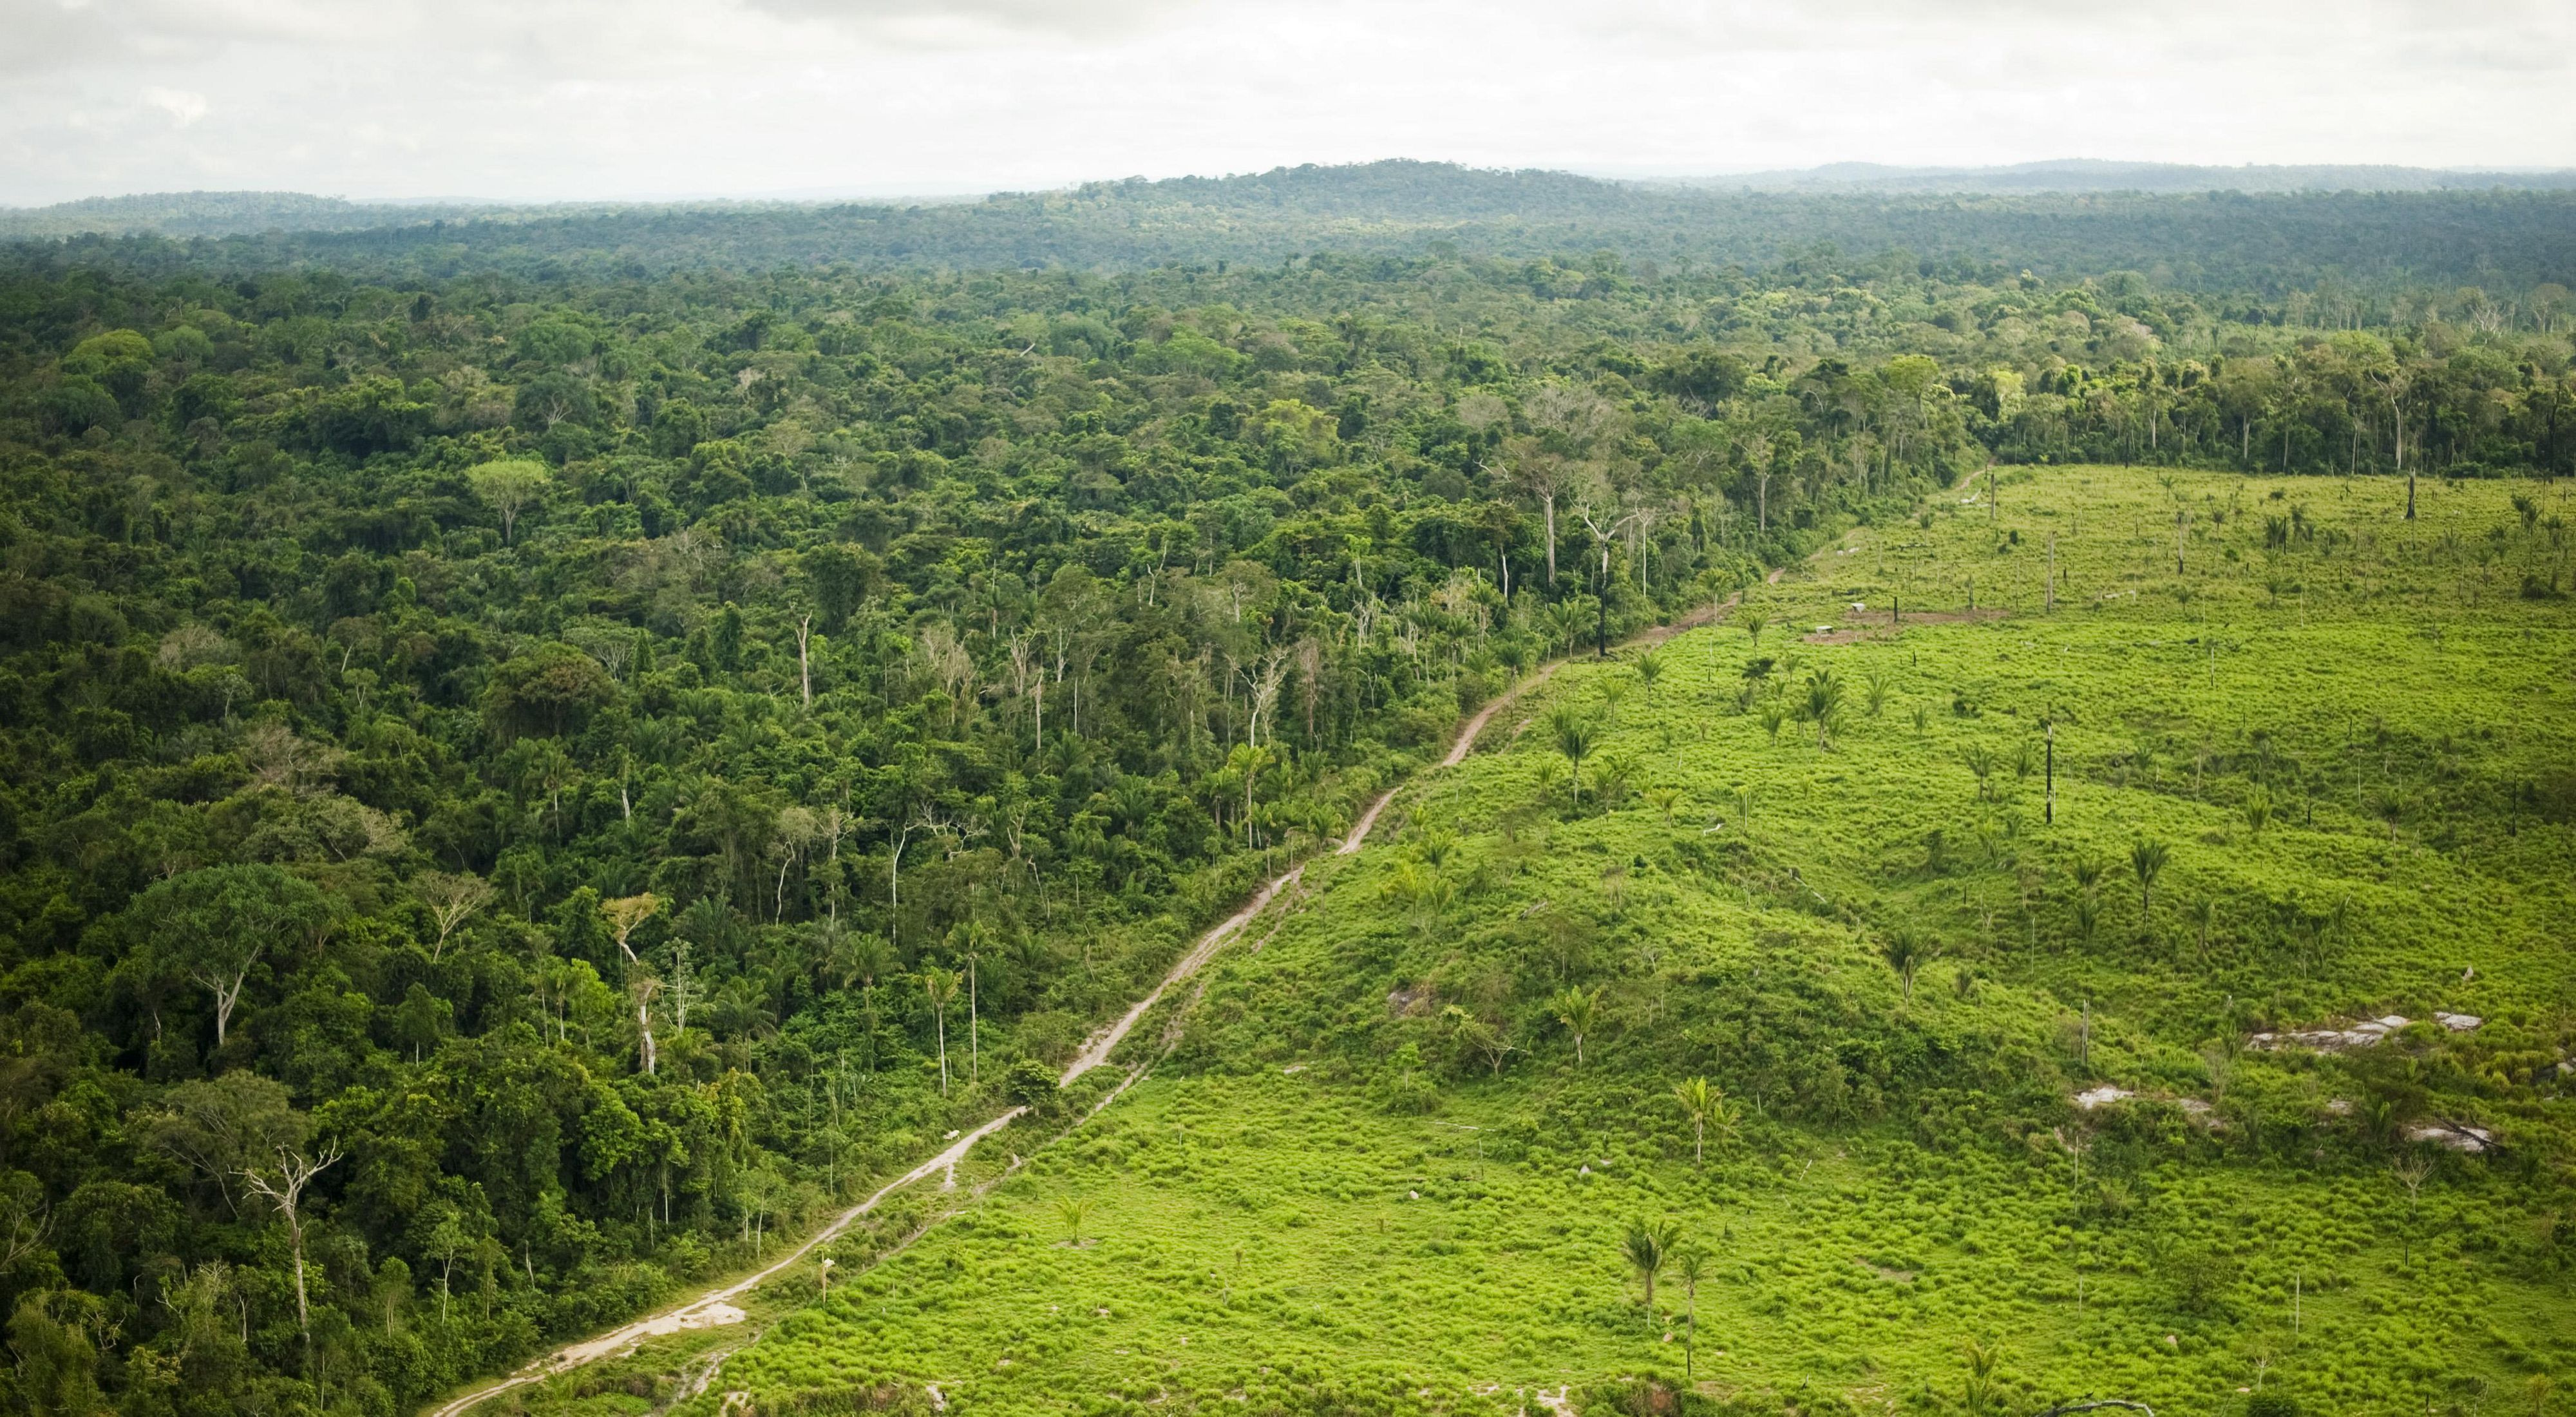 An aerial view showing deforestation for cattle ranching at São Félix do Xingu, a municipality in the Brazilian Amazon, that has one of the highest rates of deforestation in the country. Understanding that conversion to agriculture and cattle ranching is the greatest threat to the Amazon rainforest, the Conservancy works in strategic municipalities of the Brazilian Amazon such as São Félix do Xingu to implement strategies to control deforestation and promote the responsible production of soy and beef among farmers and ranchers. São Félix do Xingu is also one of the focal areas for the Conservancy's work on demonstrating how REDD programs can work on the ground.